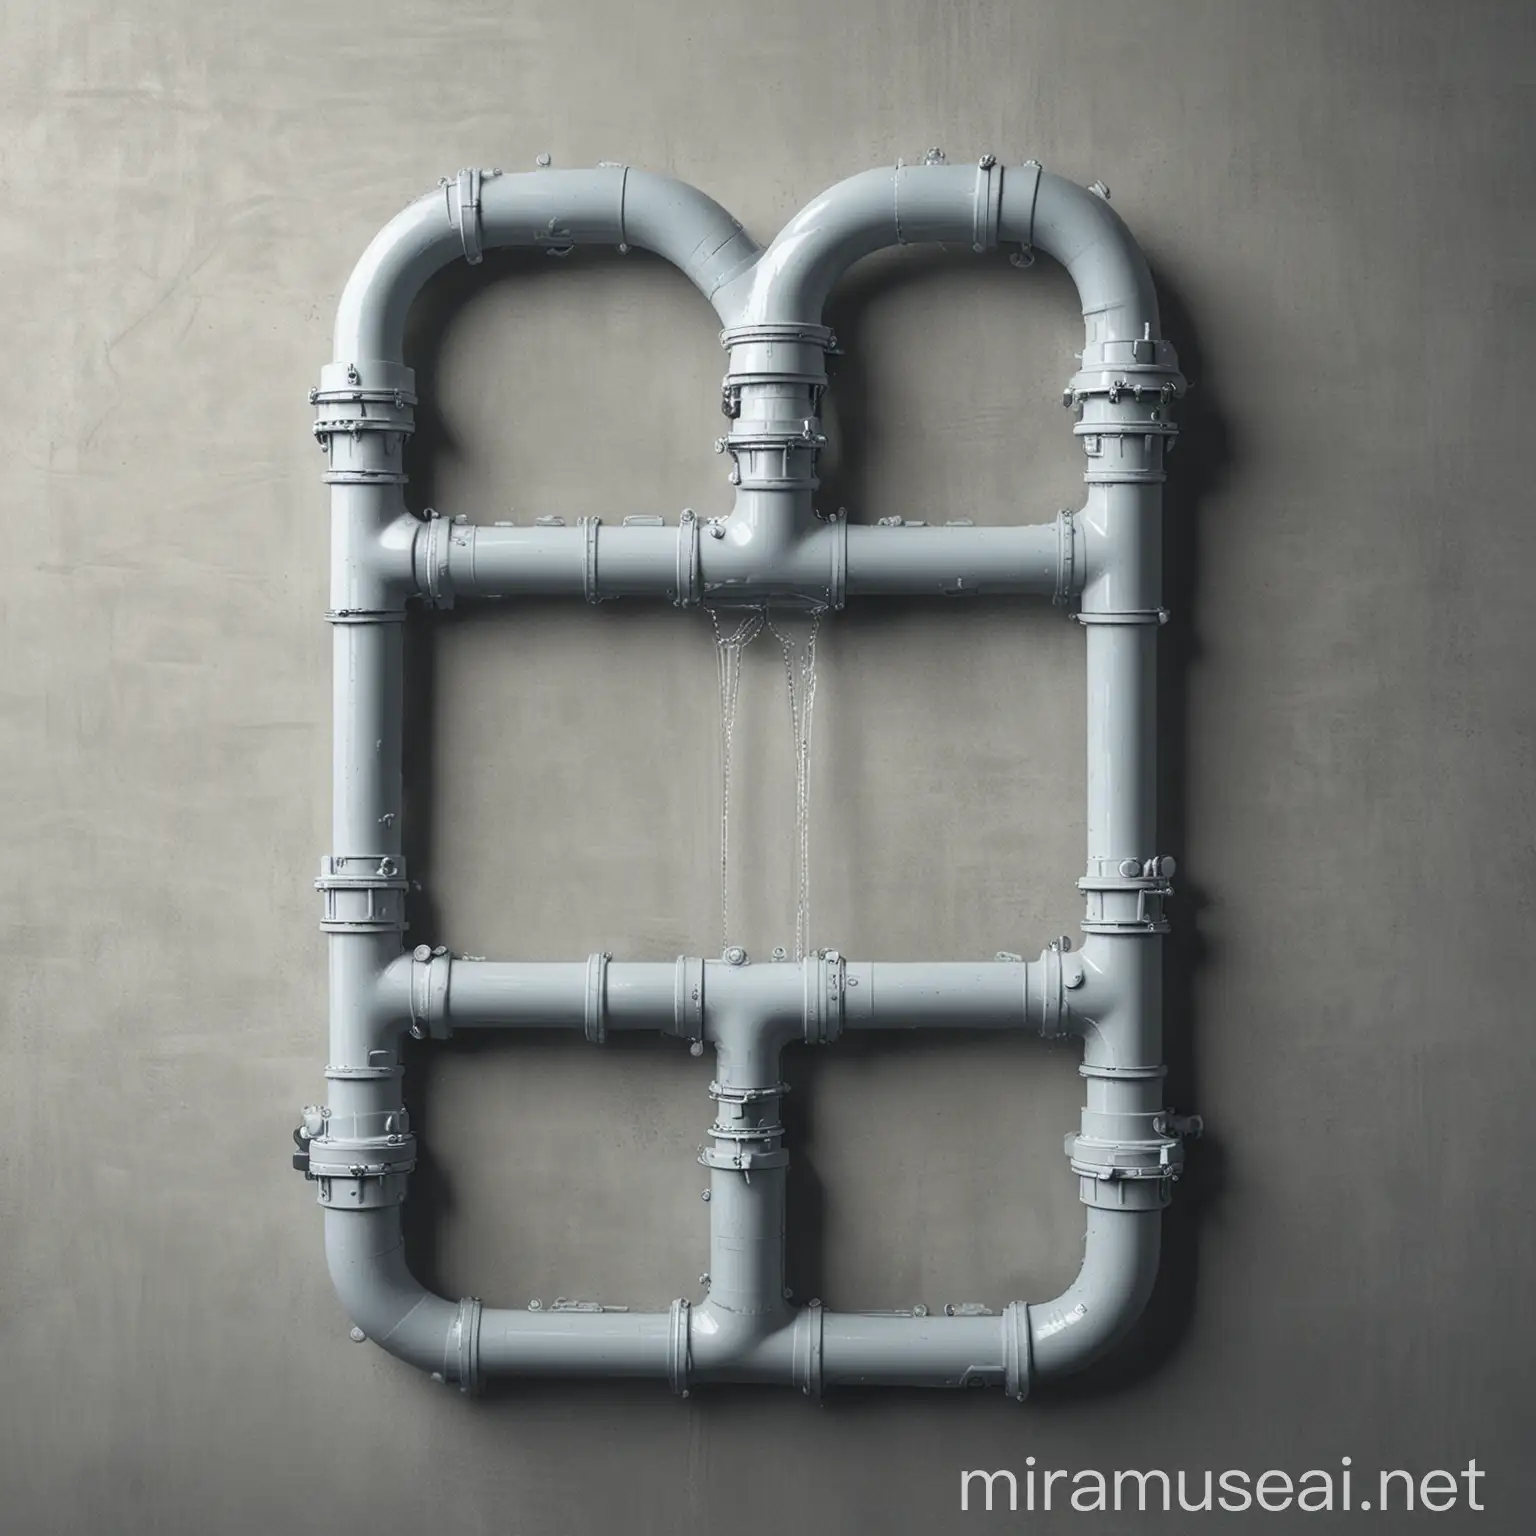 Intricate Network of Water Pipes Under Cityscape